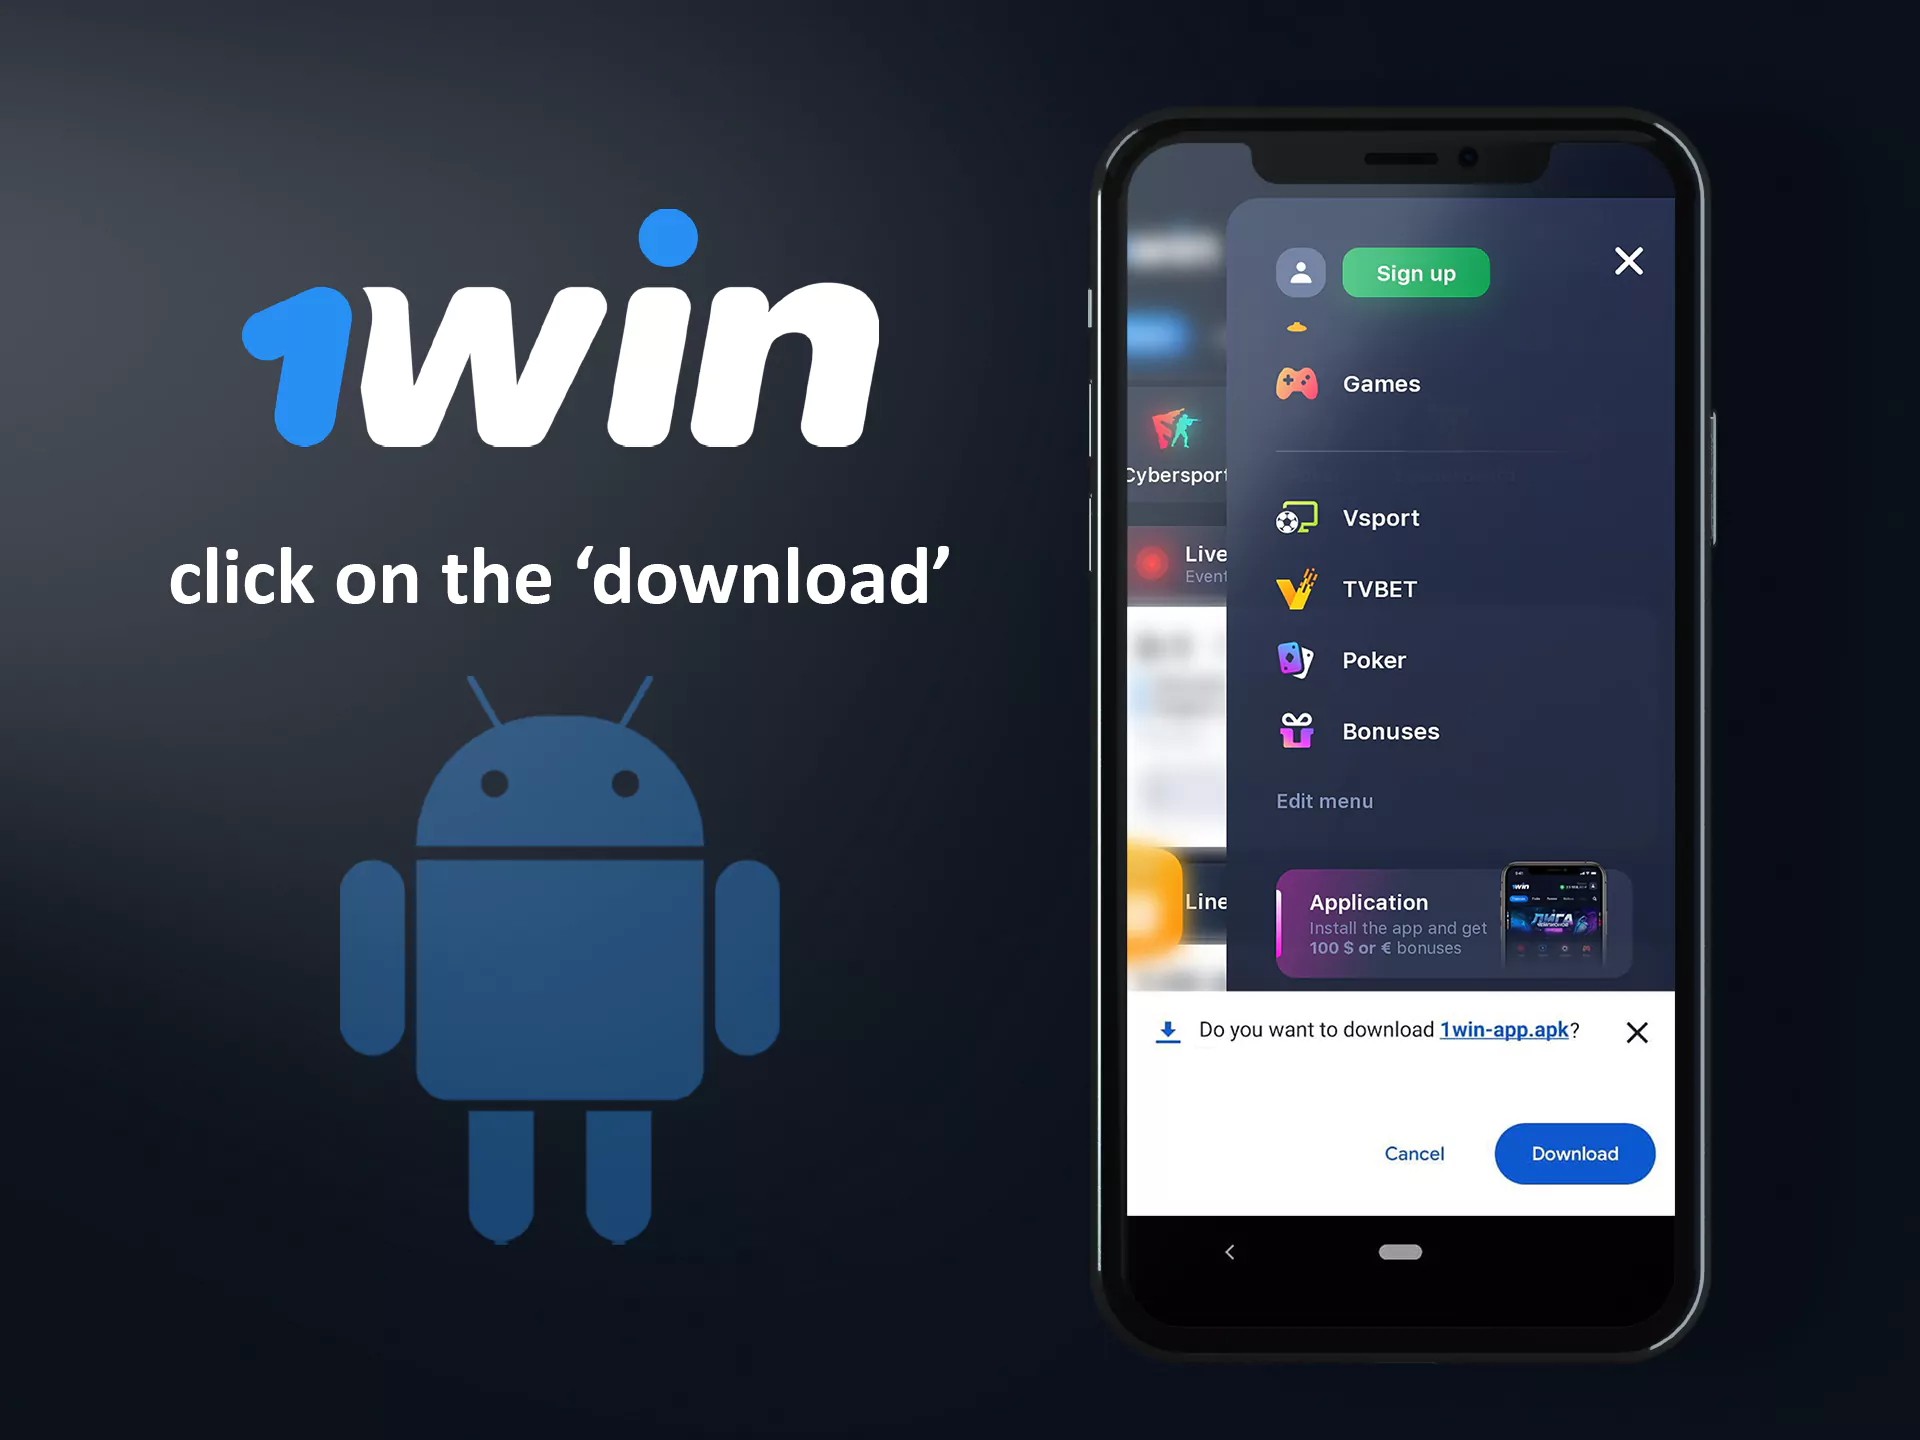 Allow the browser to download the application from the site of 1Win.